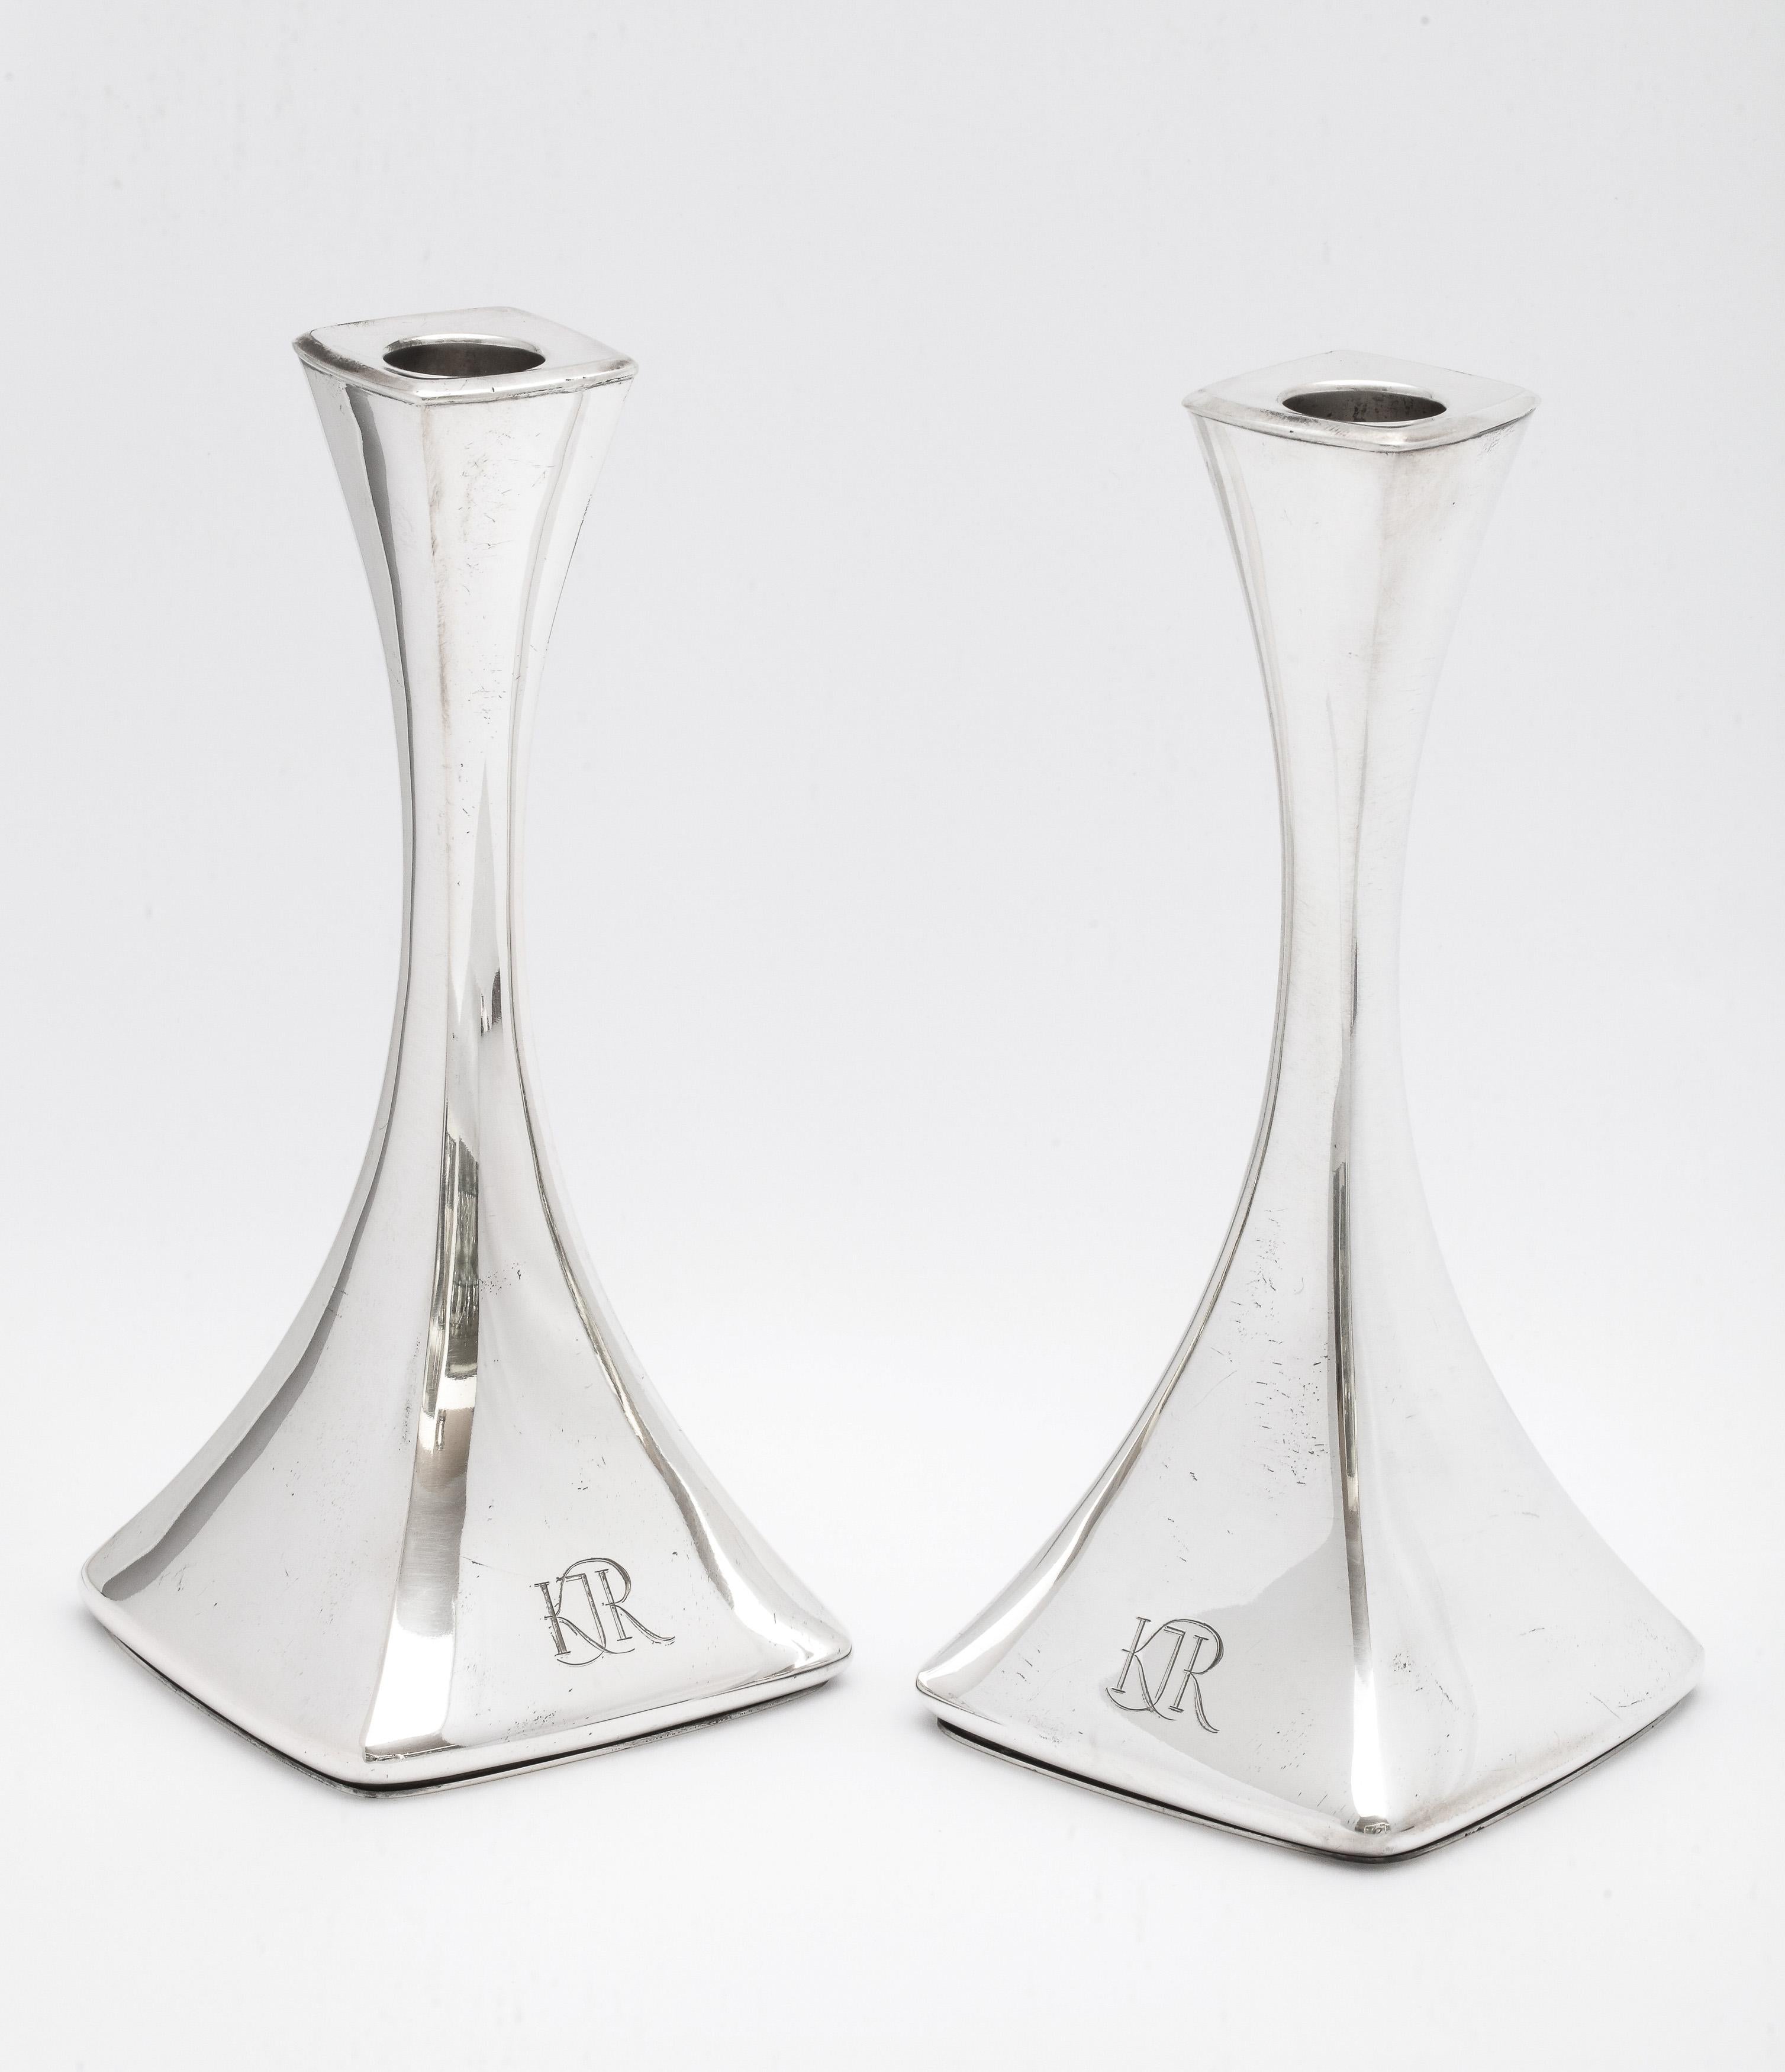 Pair of Continental silver, Mid-Century Modern candlesticks, Helsinki, Finland, year-hallmarked for 1964, Turku - maker. Each candlestick measures 7 inches high x 3 1/4 inches wide (at widest point) x 3 1/4 inches deep (at deepest point). Combined